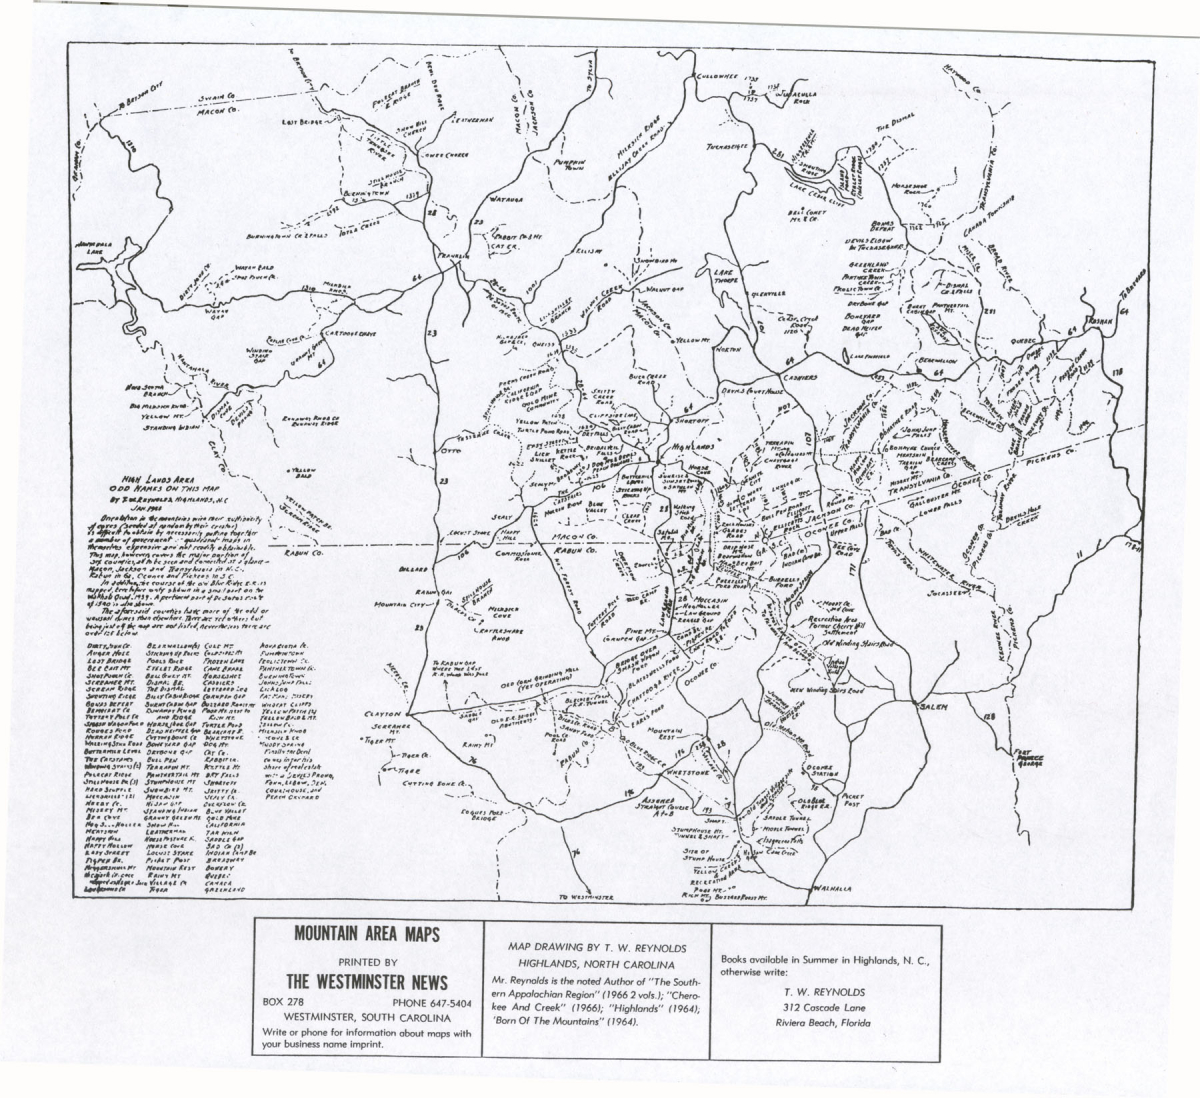 Road Map of Highlands area in 1966 (T. W. Reynolds)